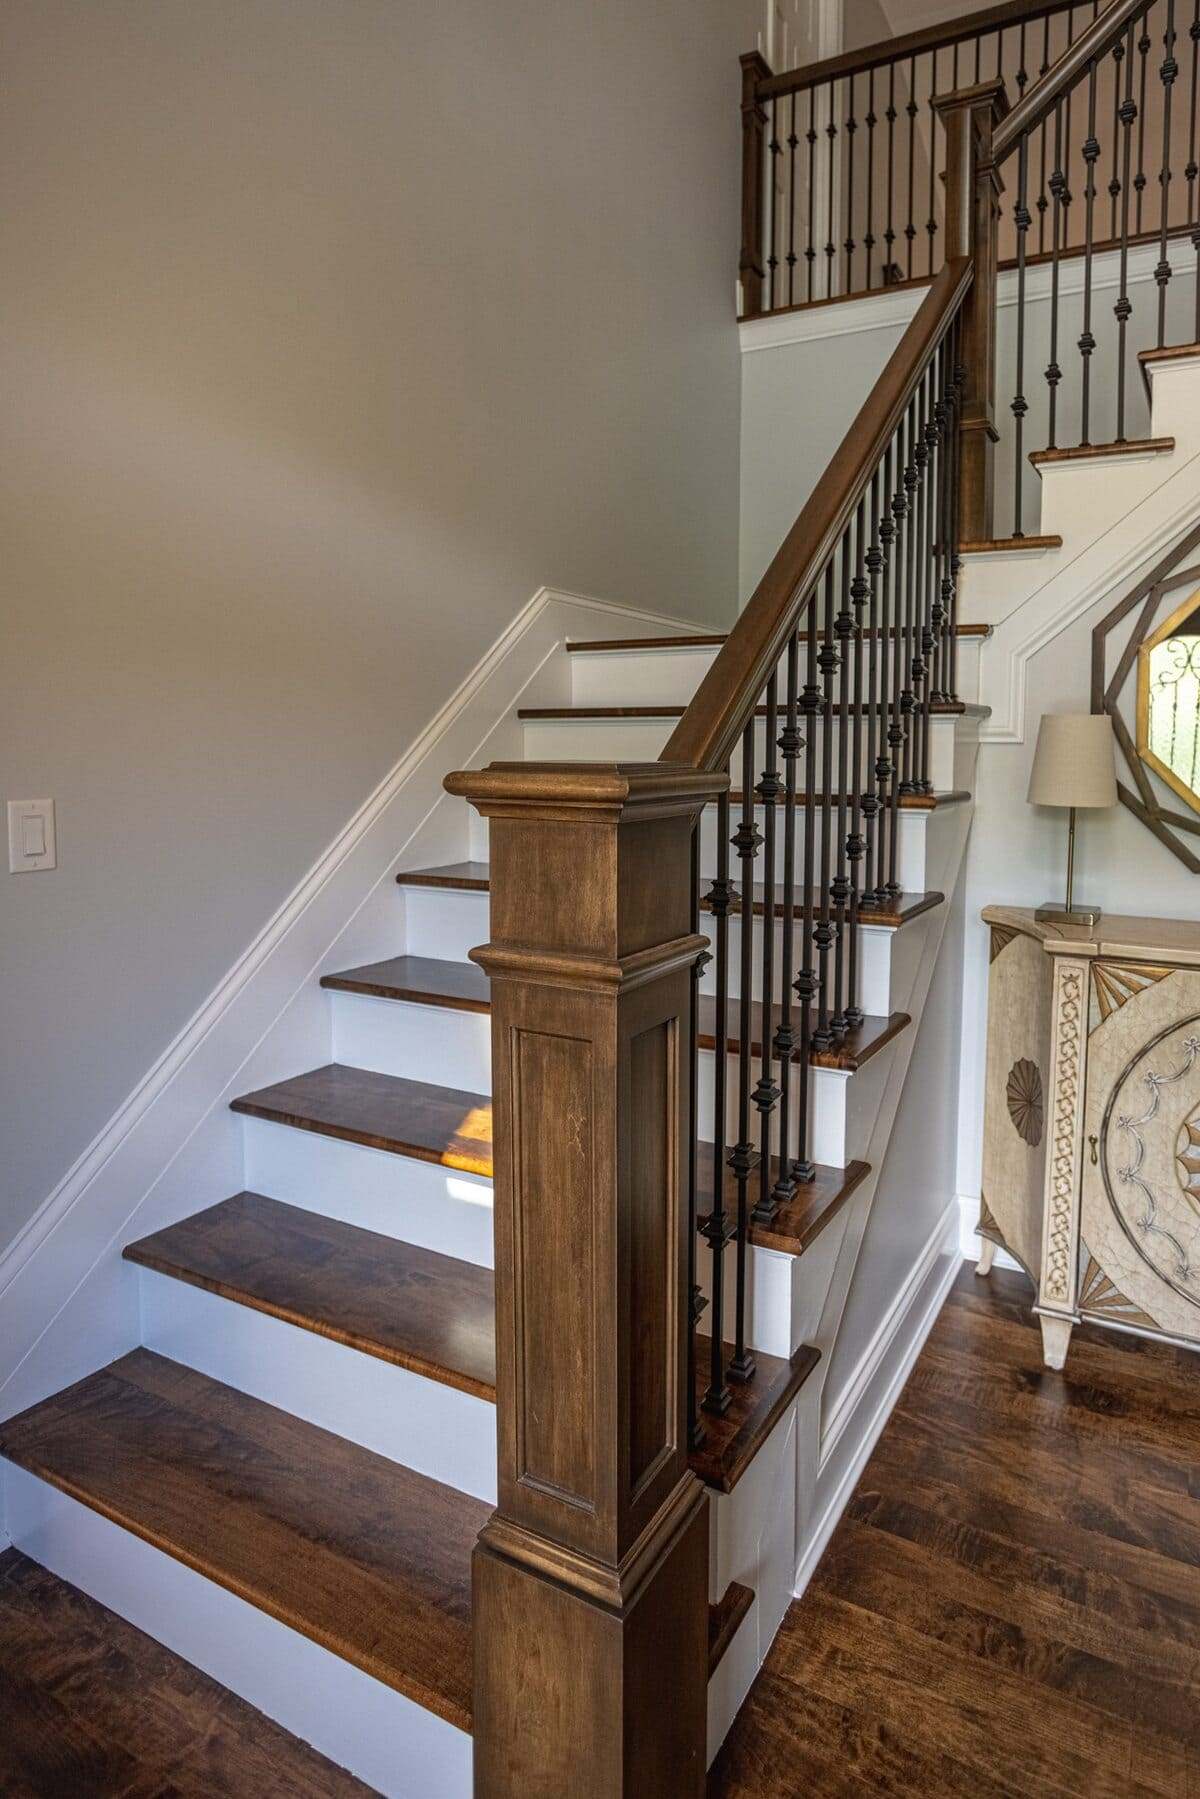 Staircase detail in two-story foyer with maple newel posts